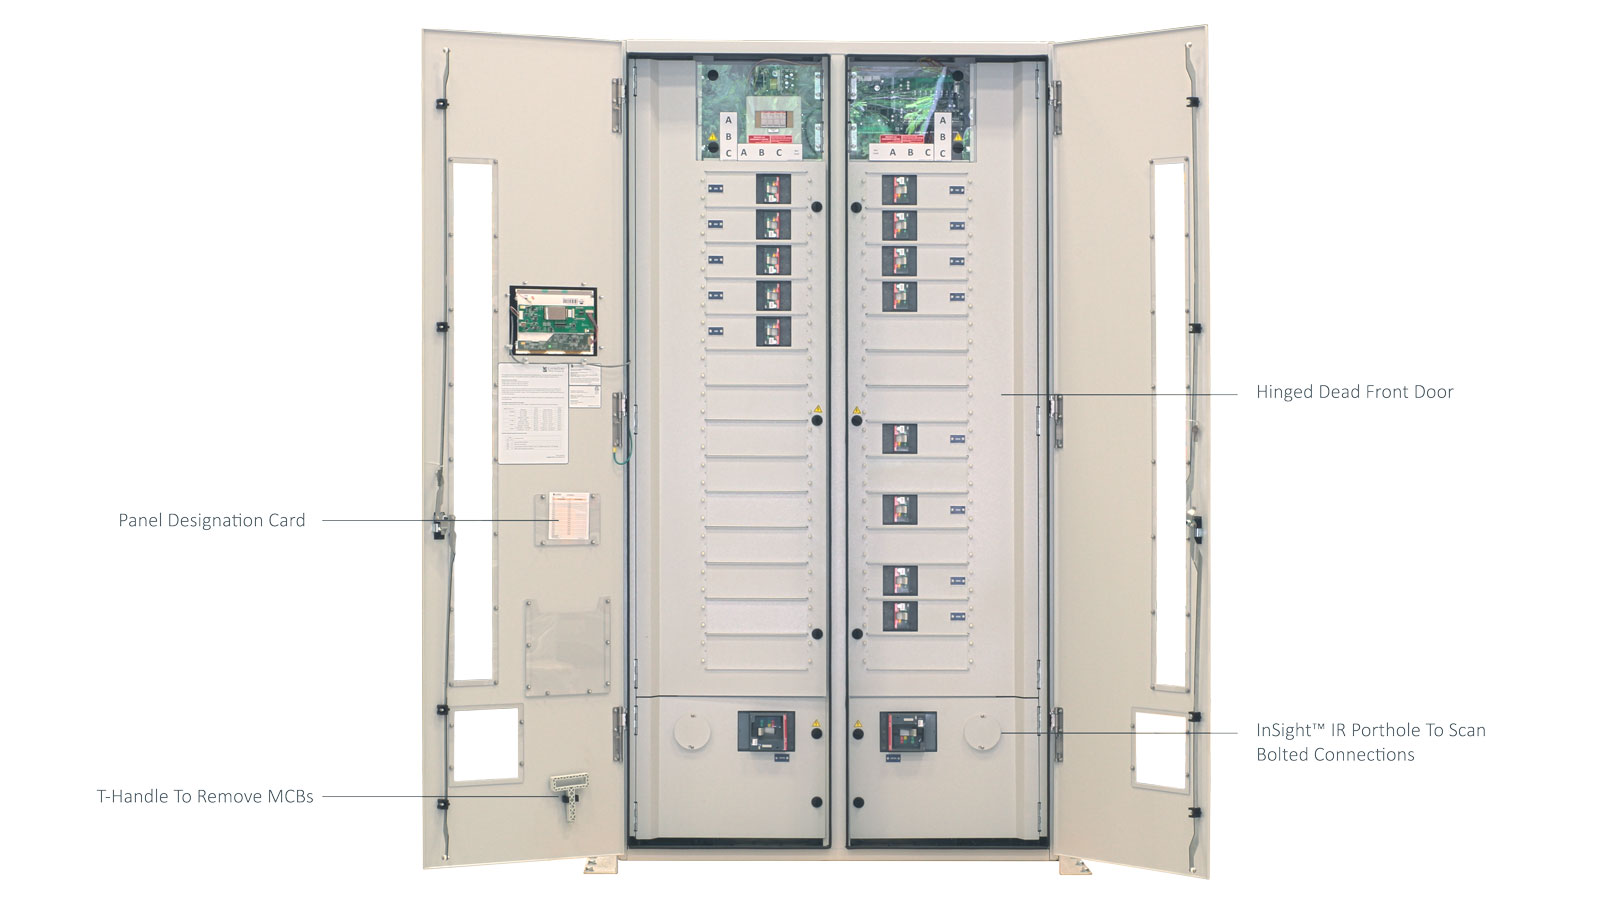 ePanel-HD2 High Density Power Panel with the Outer Door Open